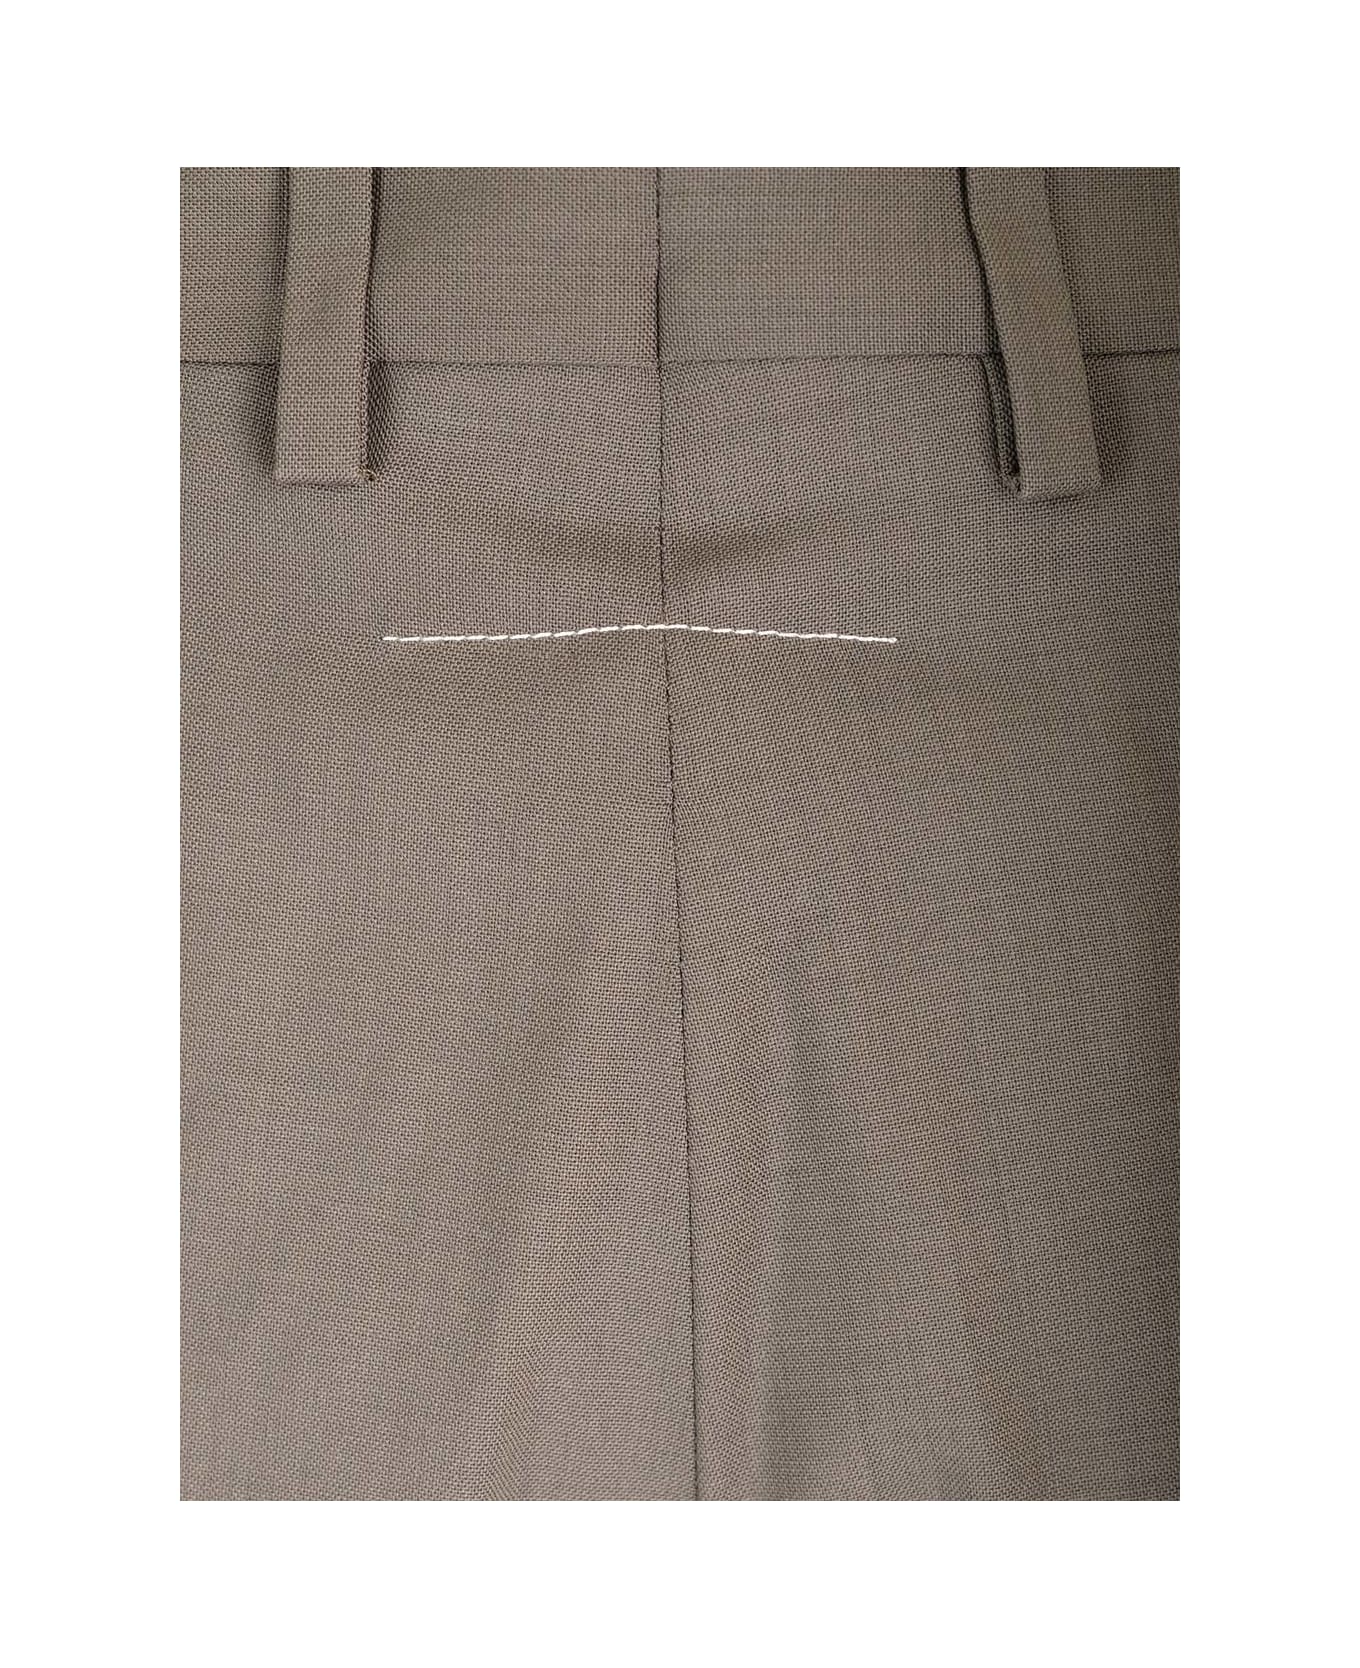 MM6 Maison Margiela Tailored Wool Trousers - Brown ボトムス